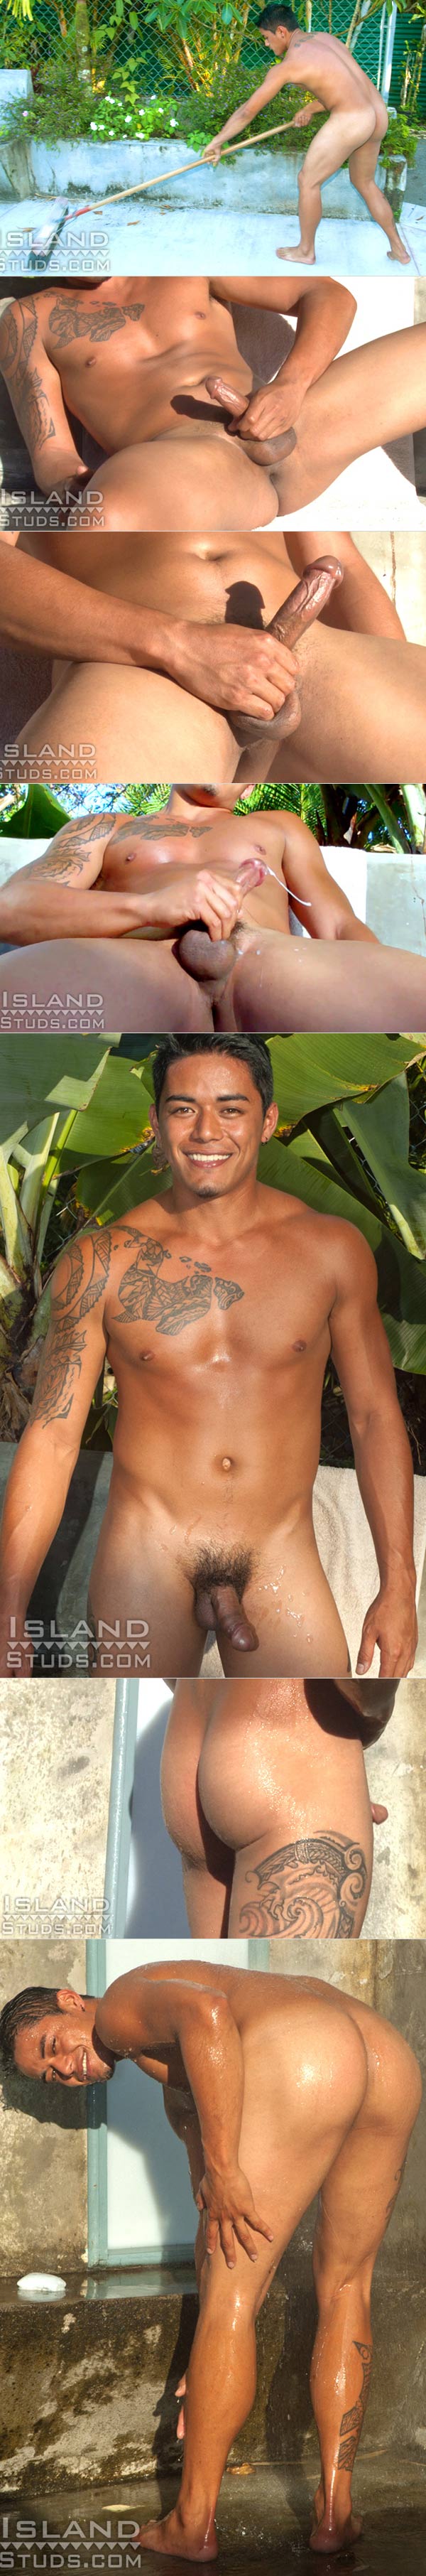 Keoni (Handsome Hawaiian with a Bubble Butt!) at IslandStuds